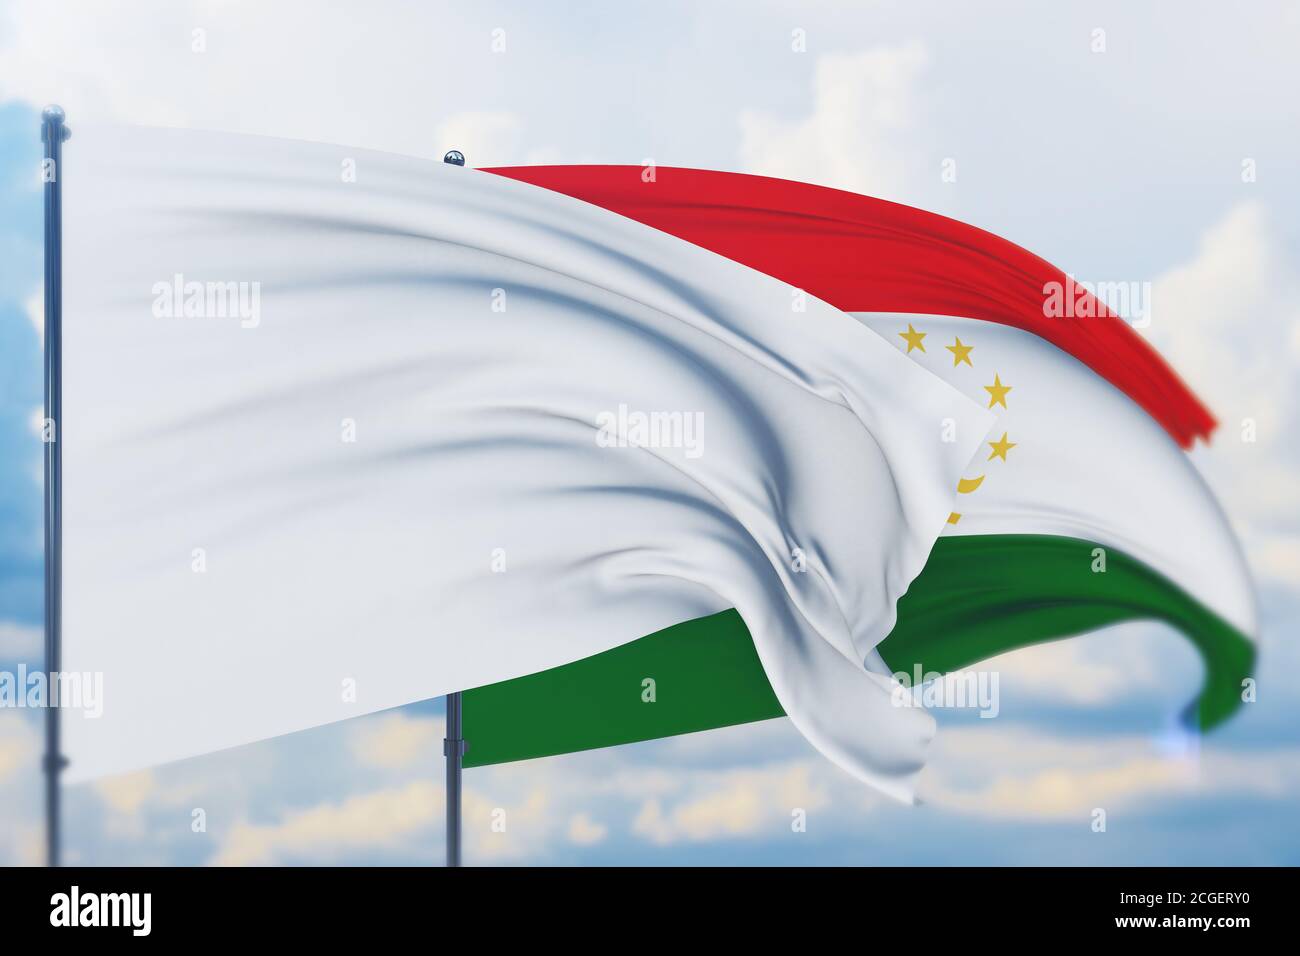 White flag on flagpole waving in the wind and flag of Tajikistan. Closeup view, 3D illustration. Stock Photo